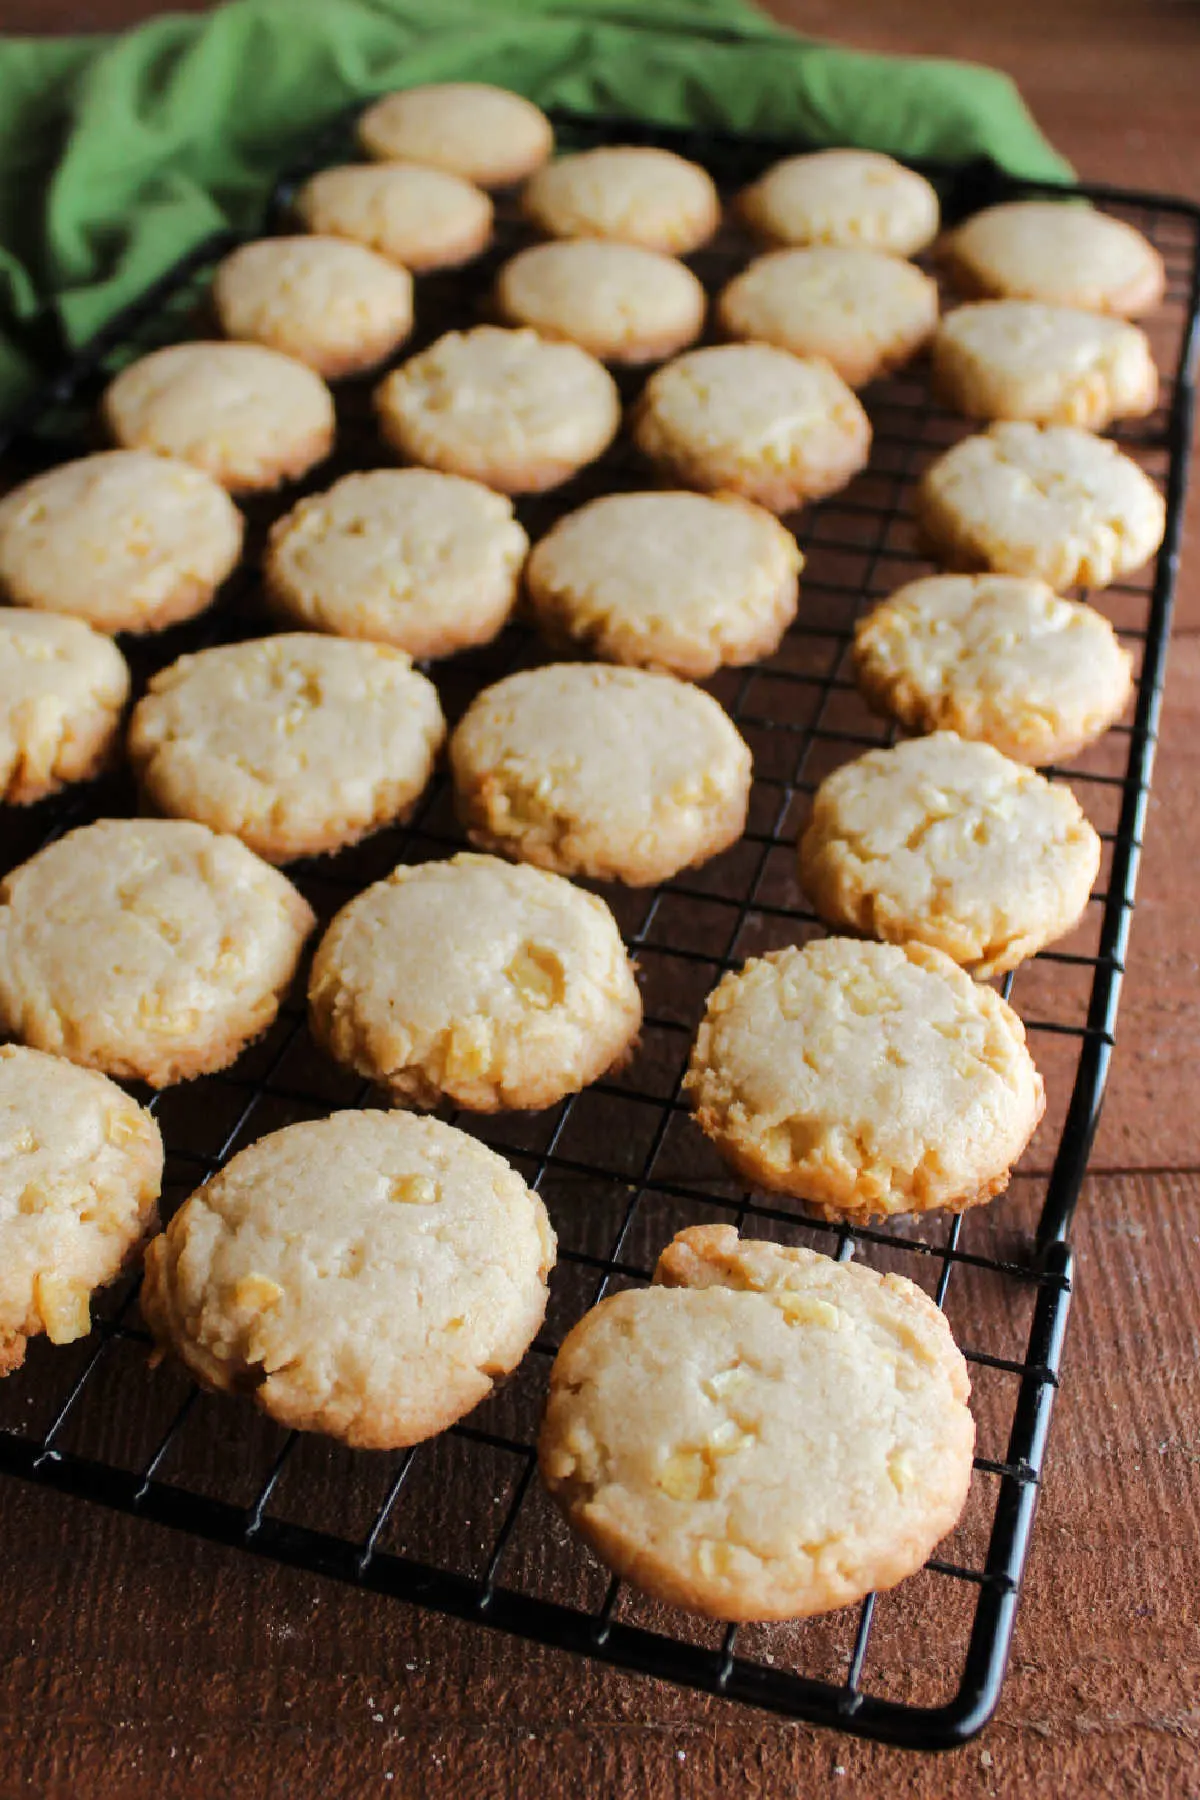 Potato chip cookies with golden brown edges cooling on wire rack.